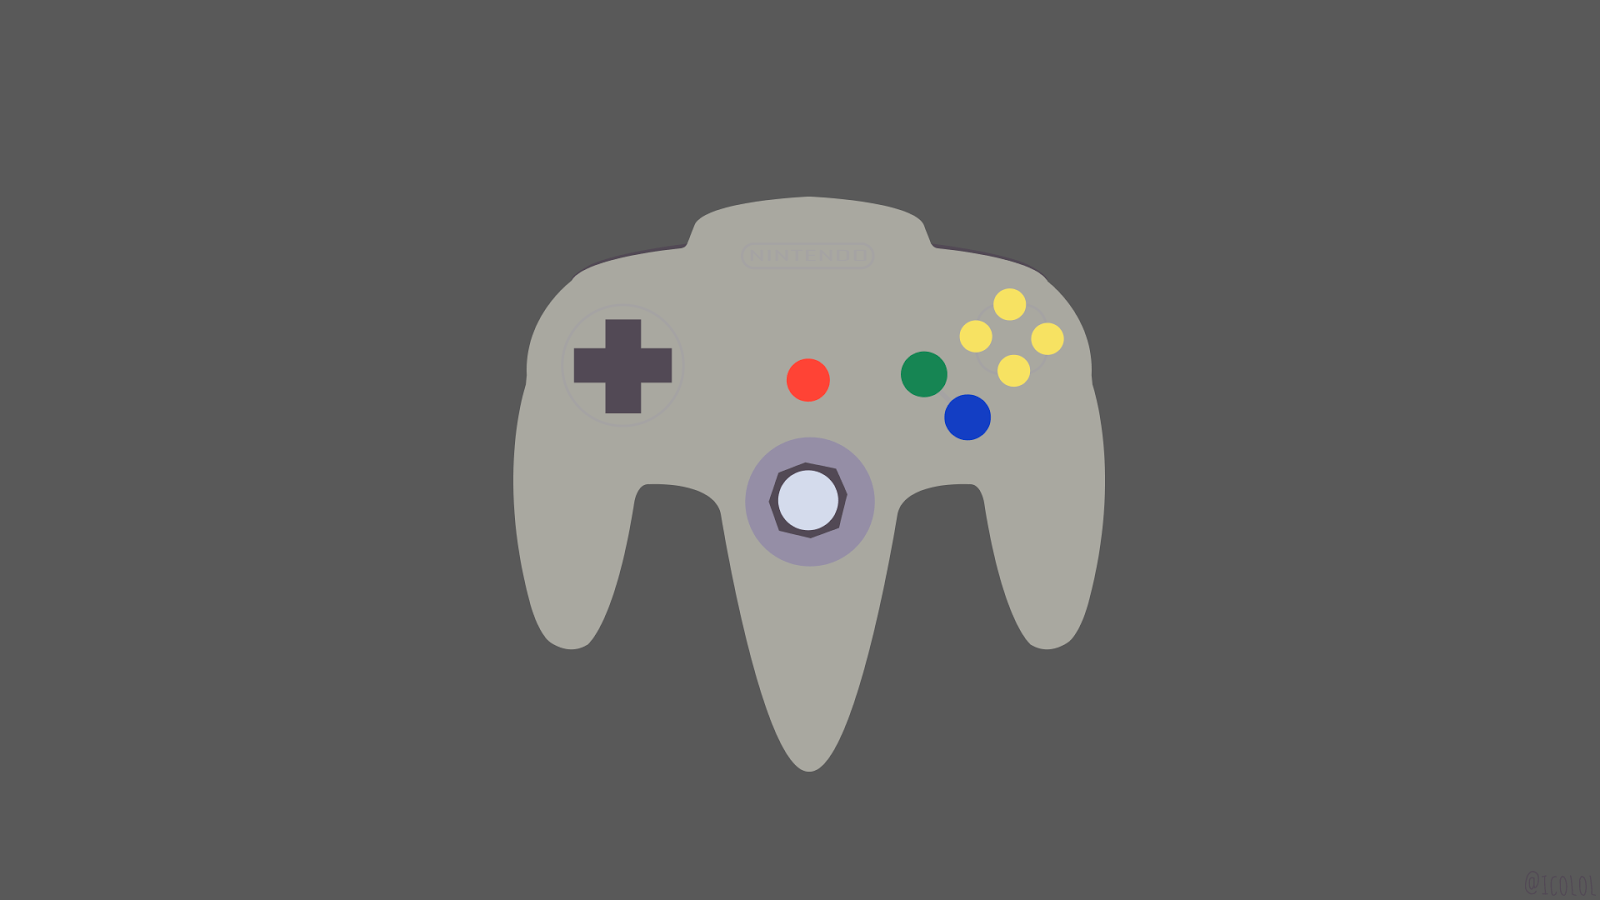 Nintendo 64 Controller Wallpaper & Background Beautiful Best Available For Download Nintendo 64 Controller Photo Free On Zicxa.com Image